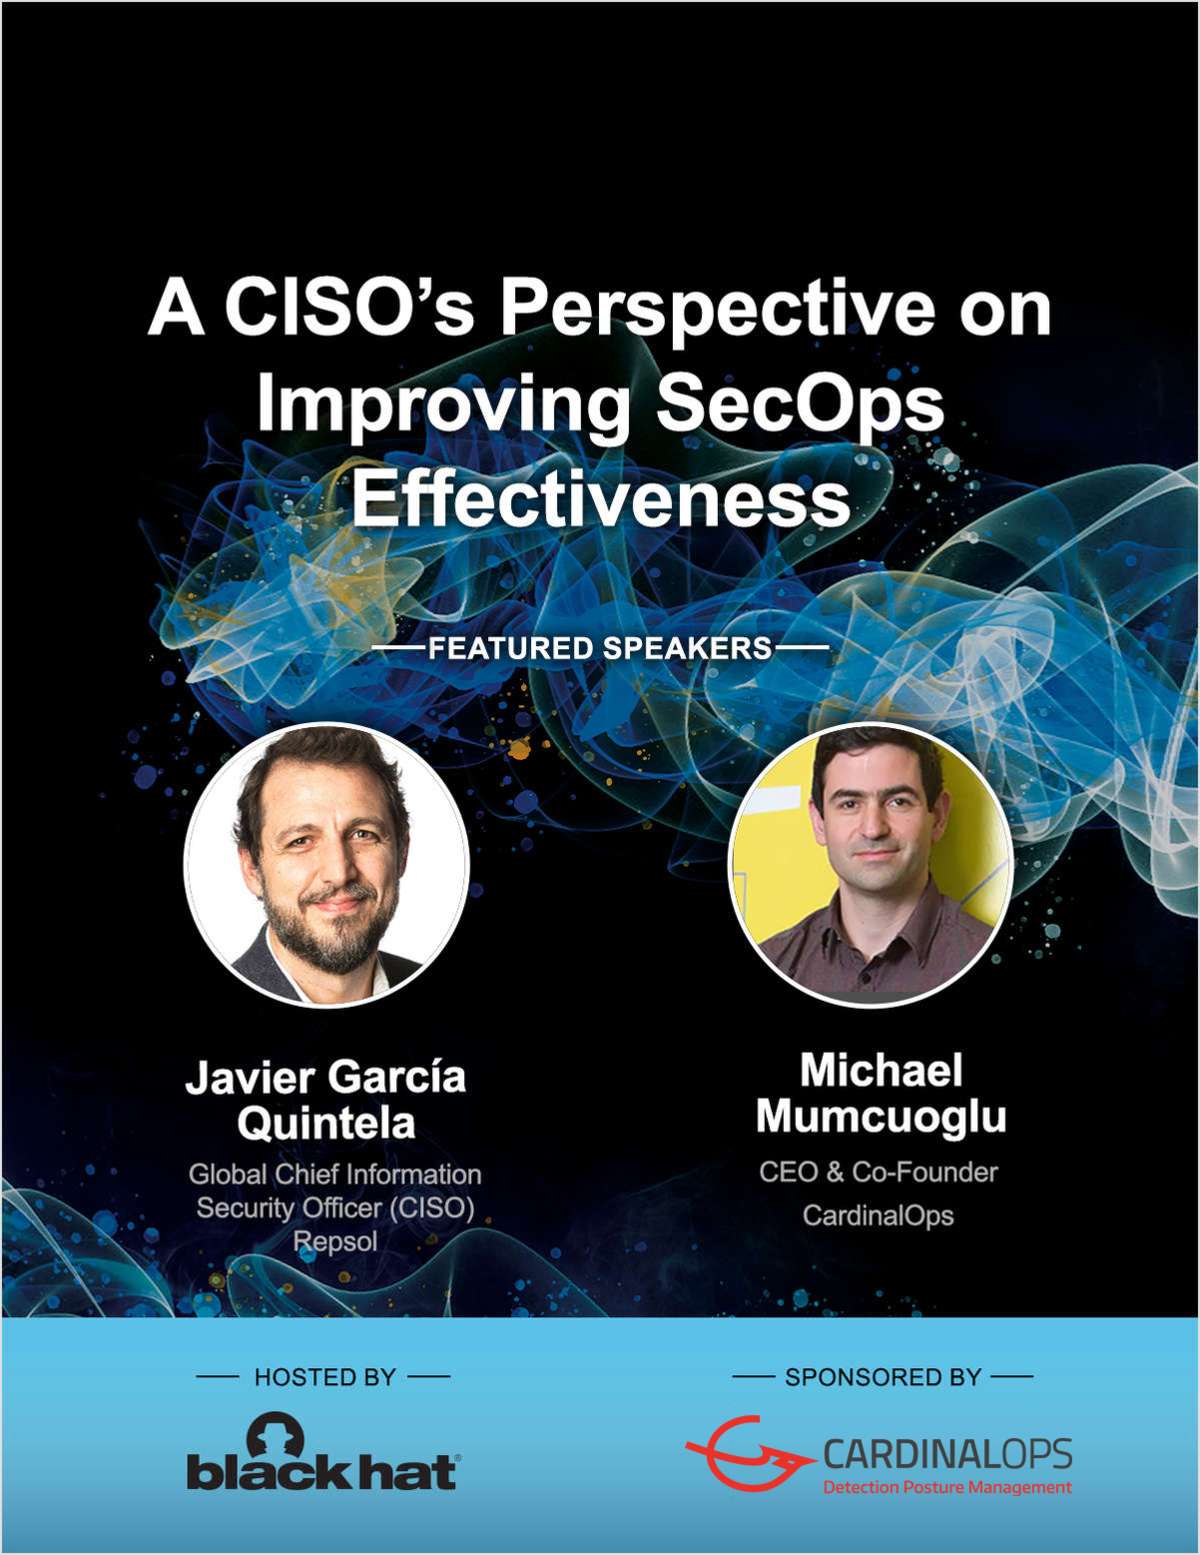 A CISO's Perspective on Improving SecOps Effectiveness